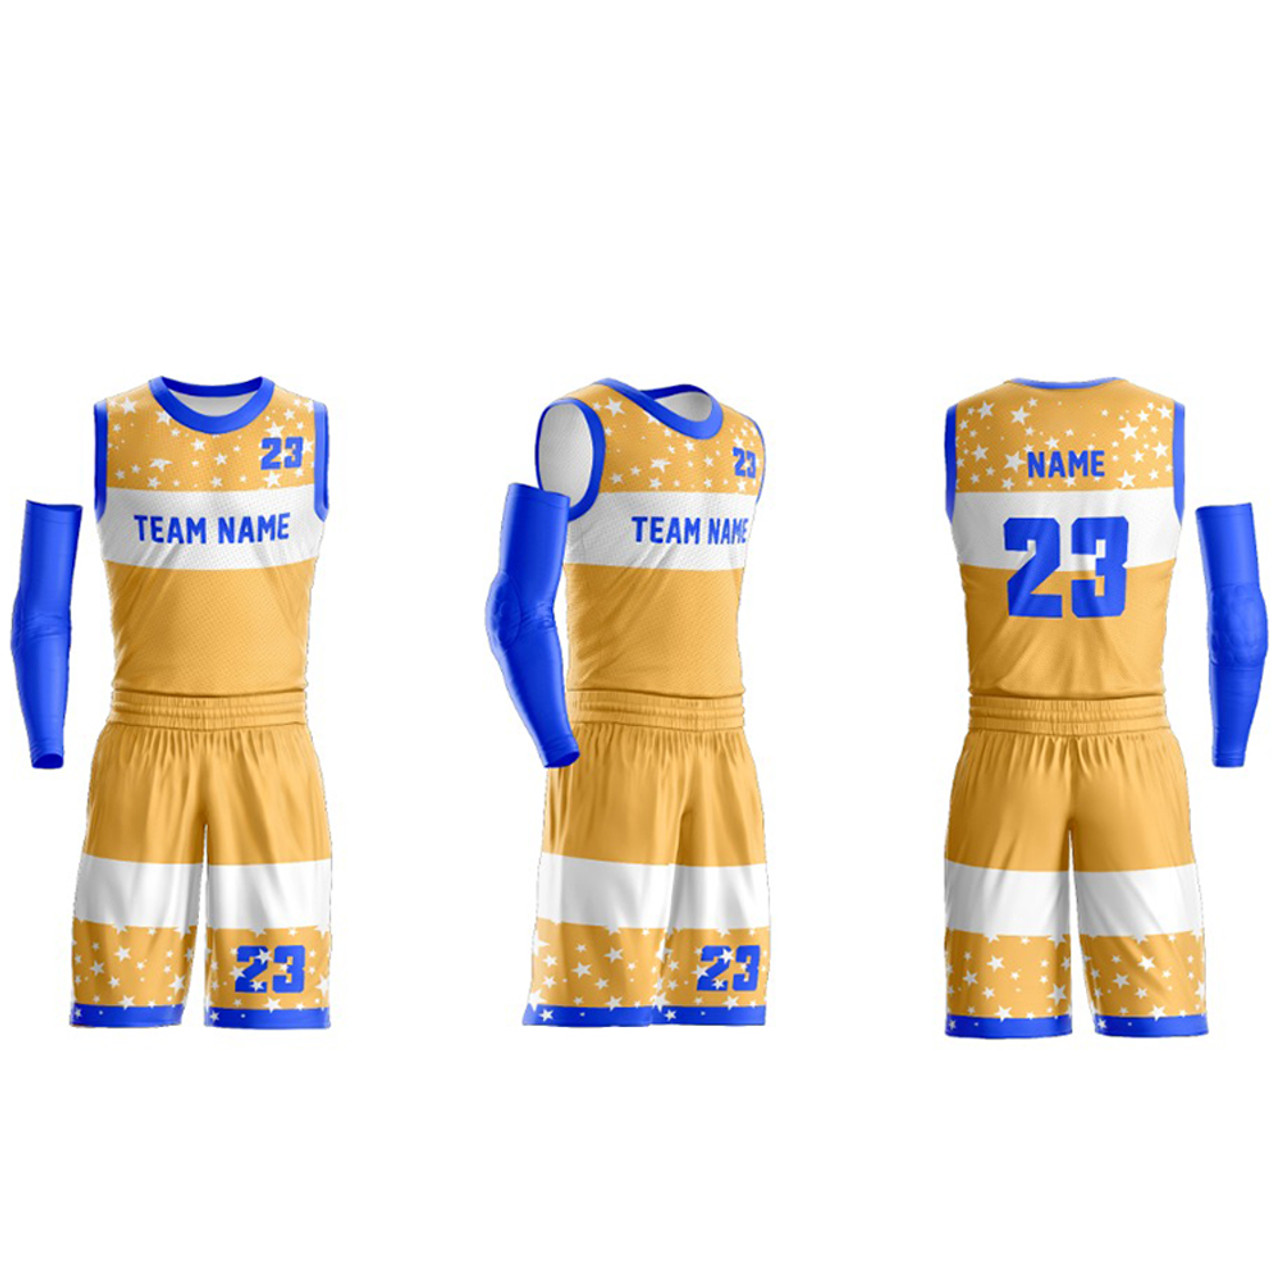 Guirenco Custom Jersey,Custom Men Basketball Jerseys with Name and